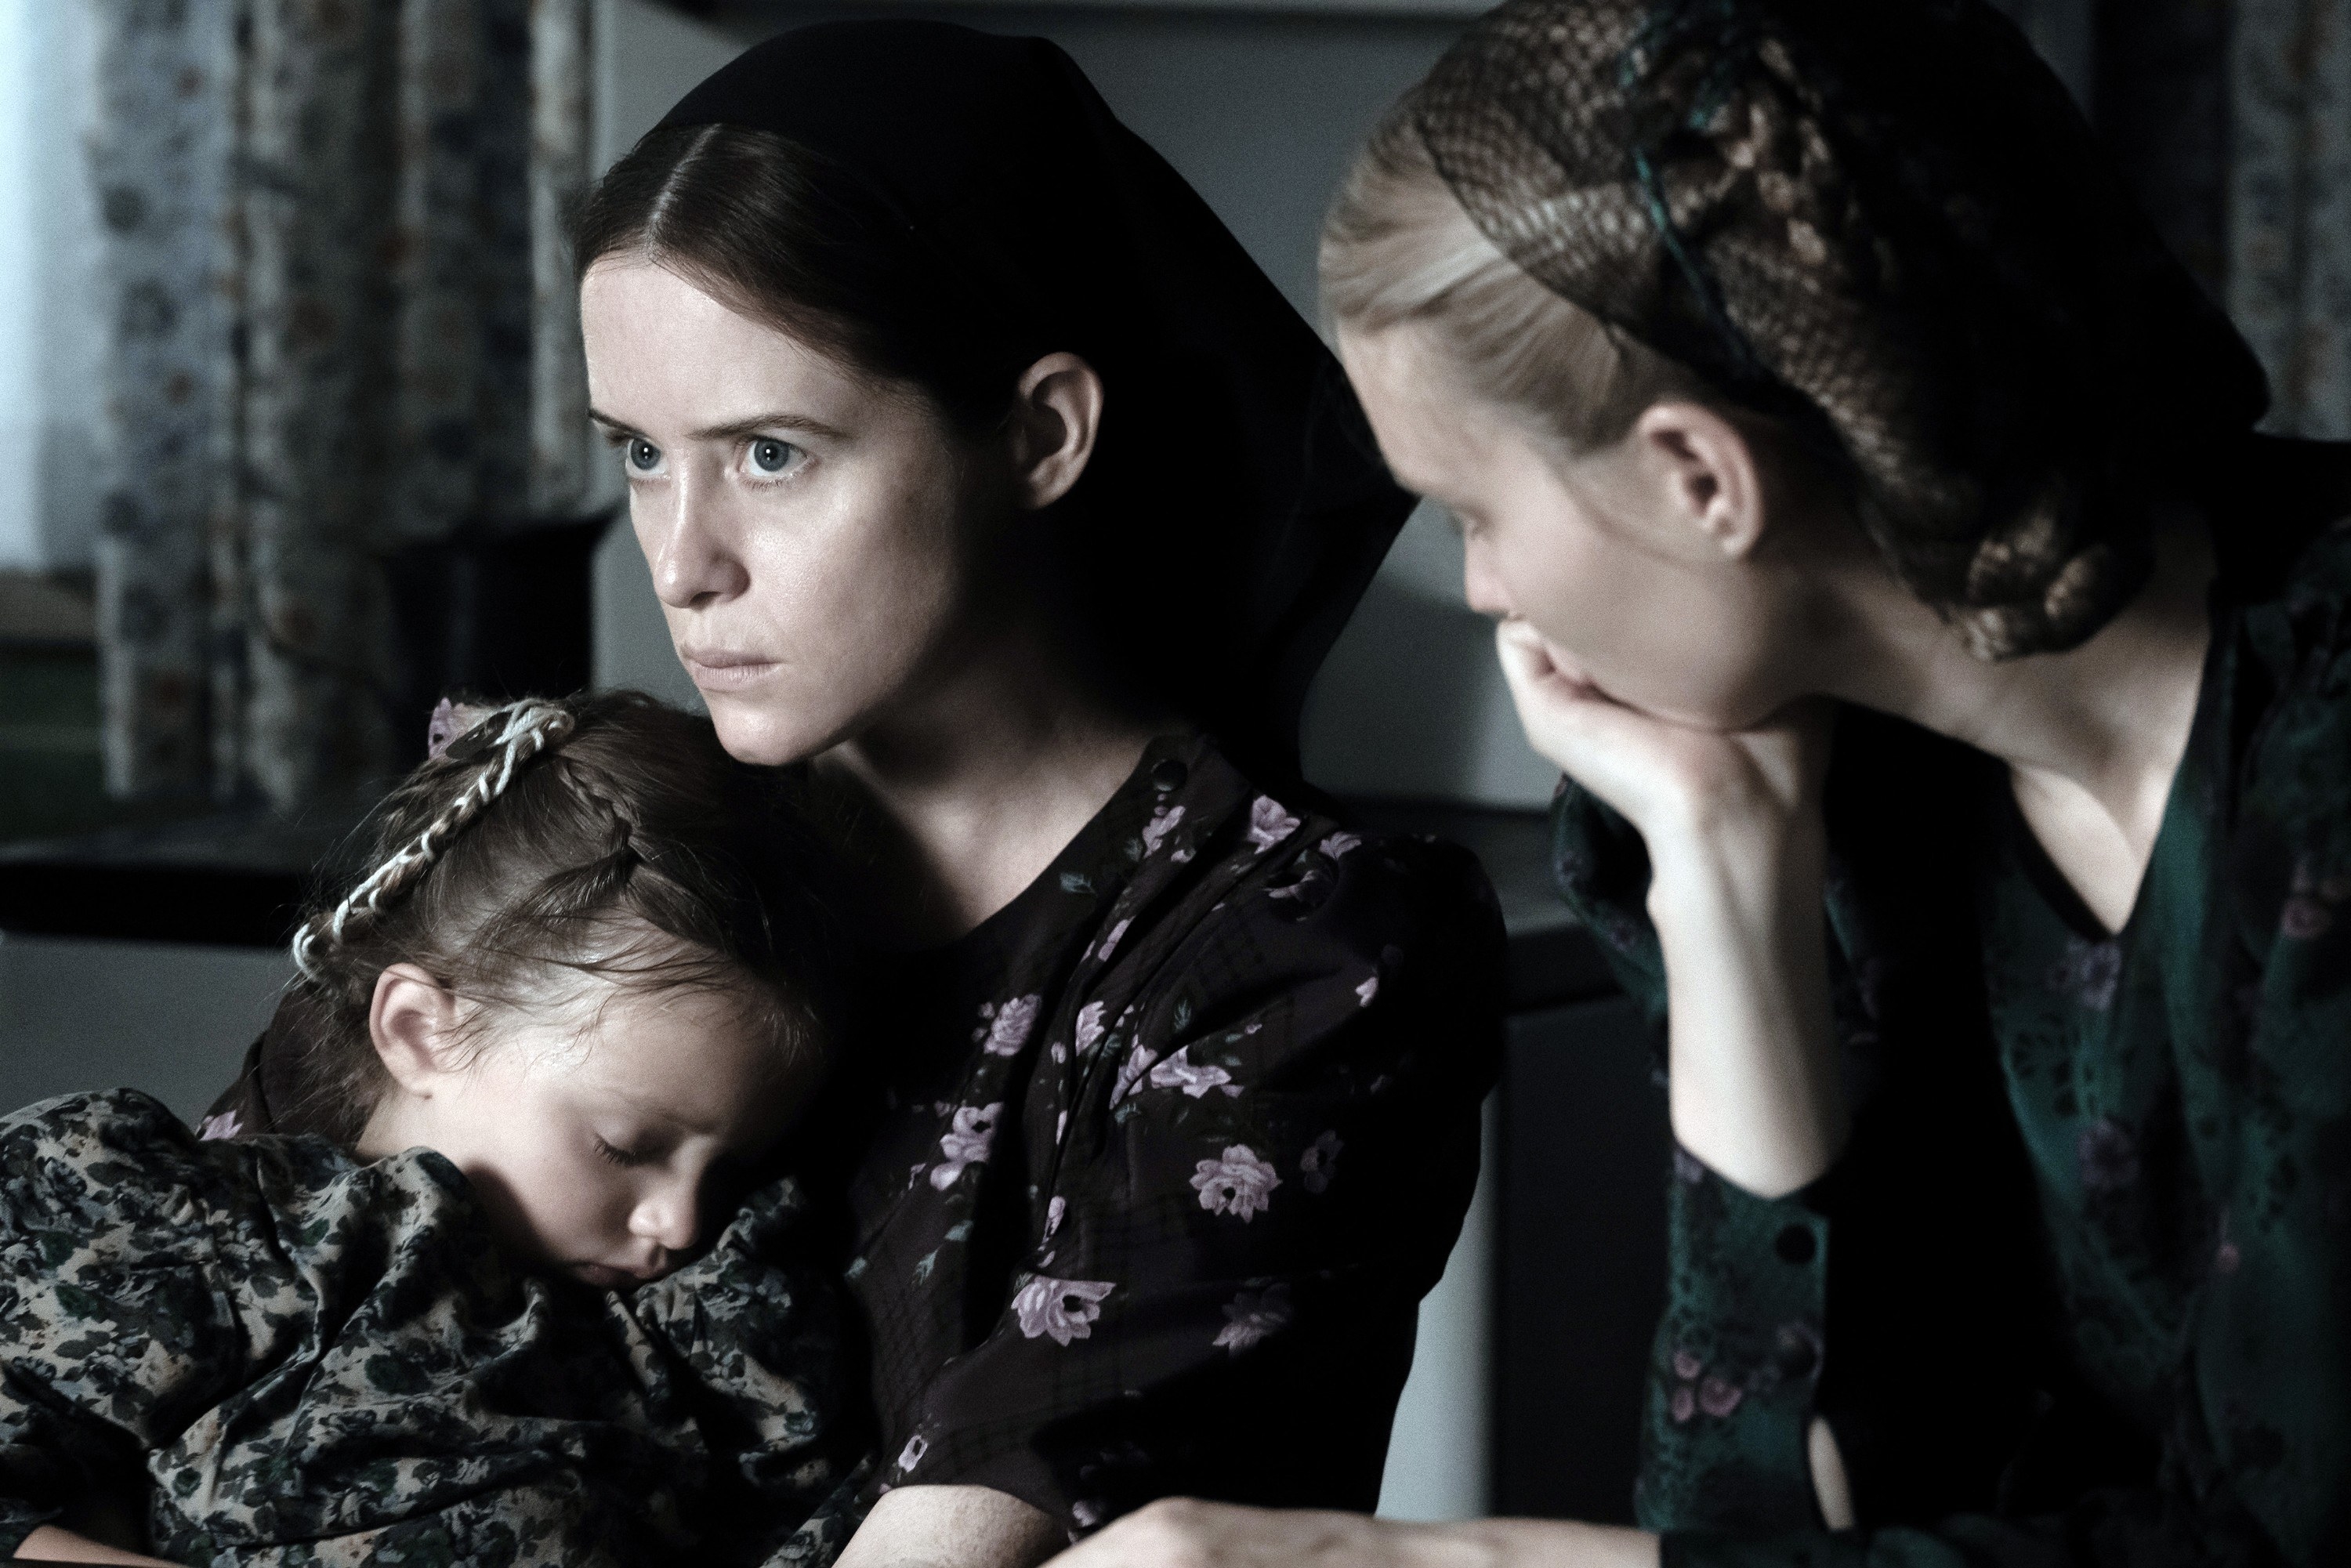 Claire Foy and Rooney Mara sit together